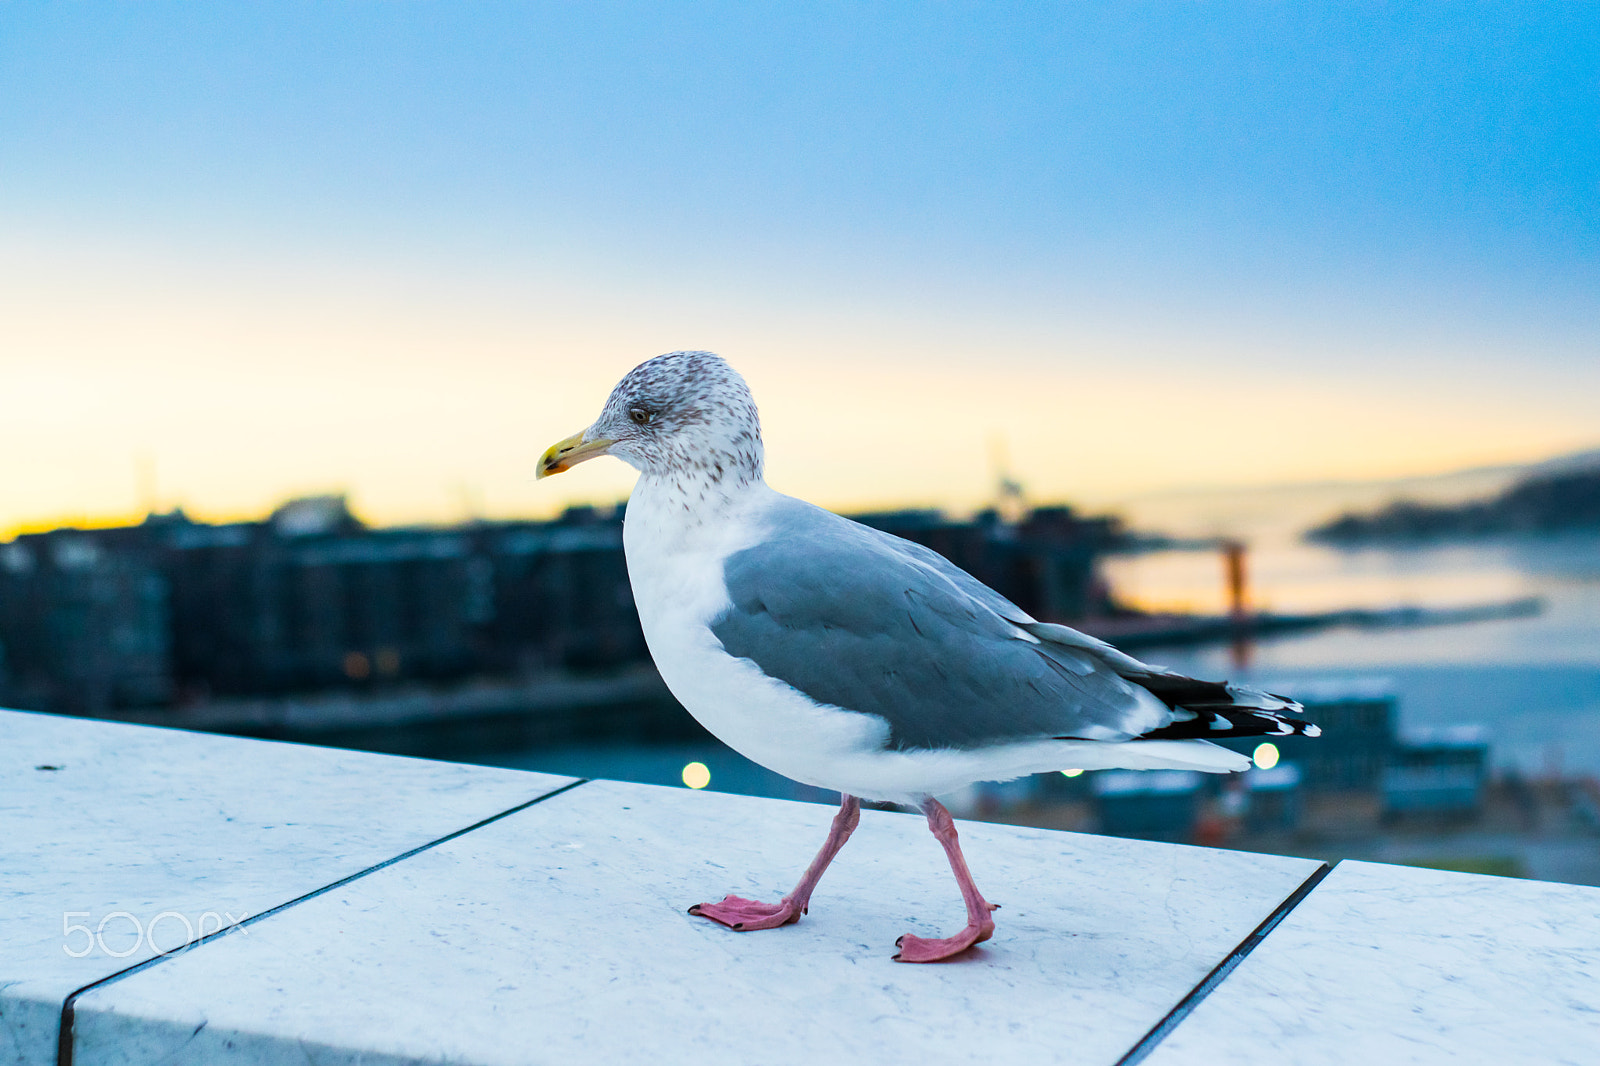 Nikon D5300 + AF-S DX VR Zoom-Nikkor 18-55mm f/3.5-5.6G + 2.8x sample photo. Seagull photography